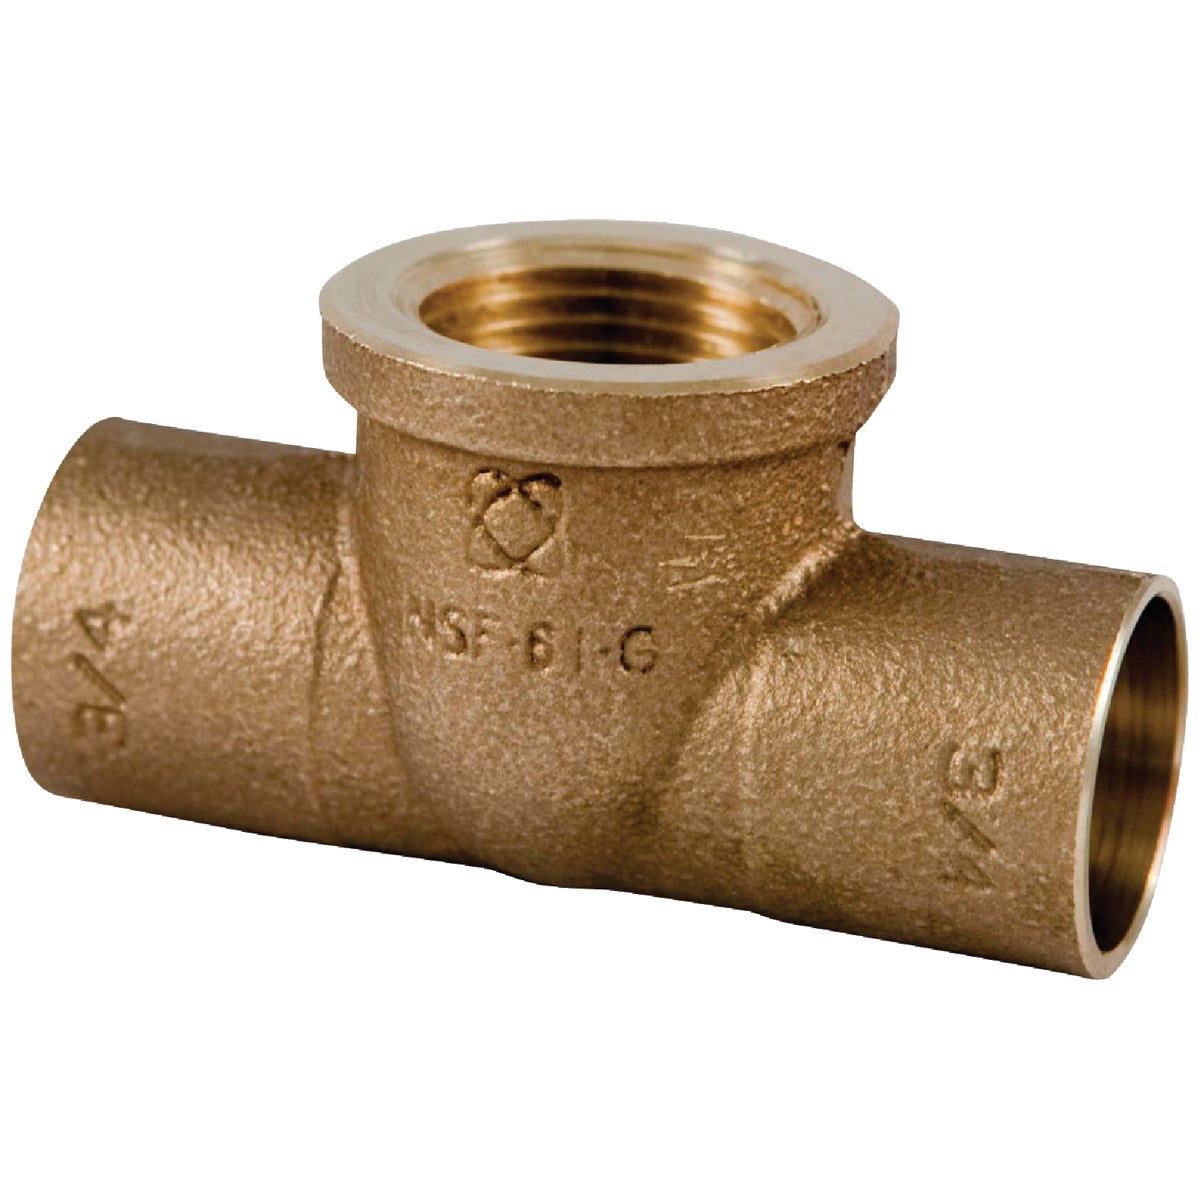 Item 400767, Used in residential and commercial plumbing applications.